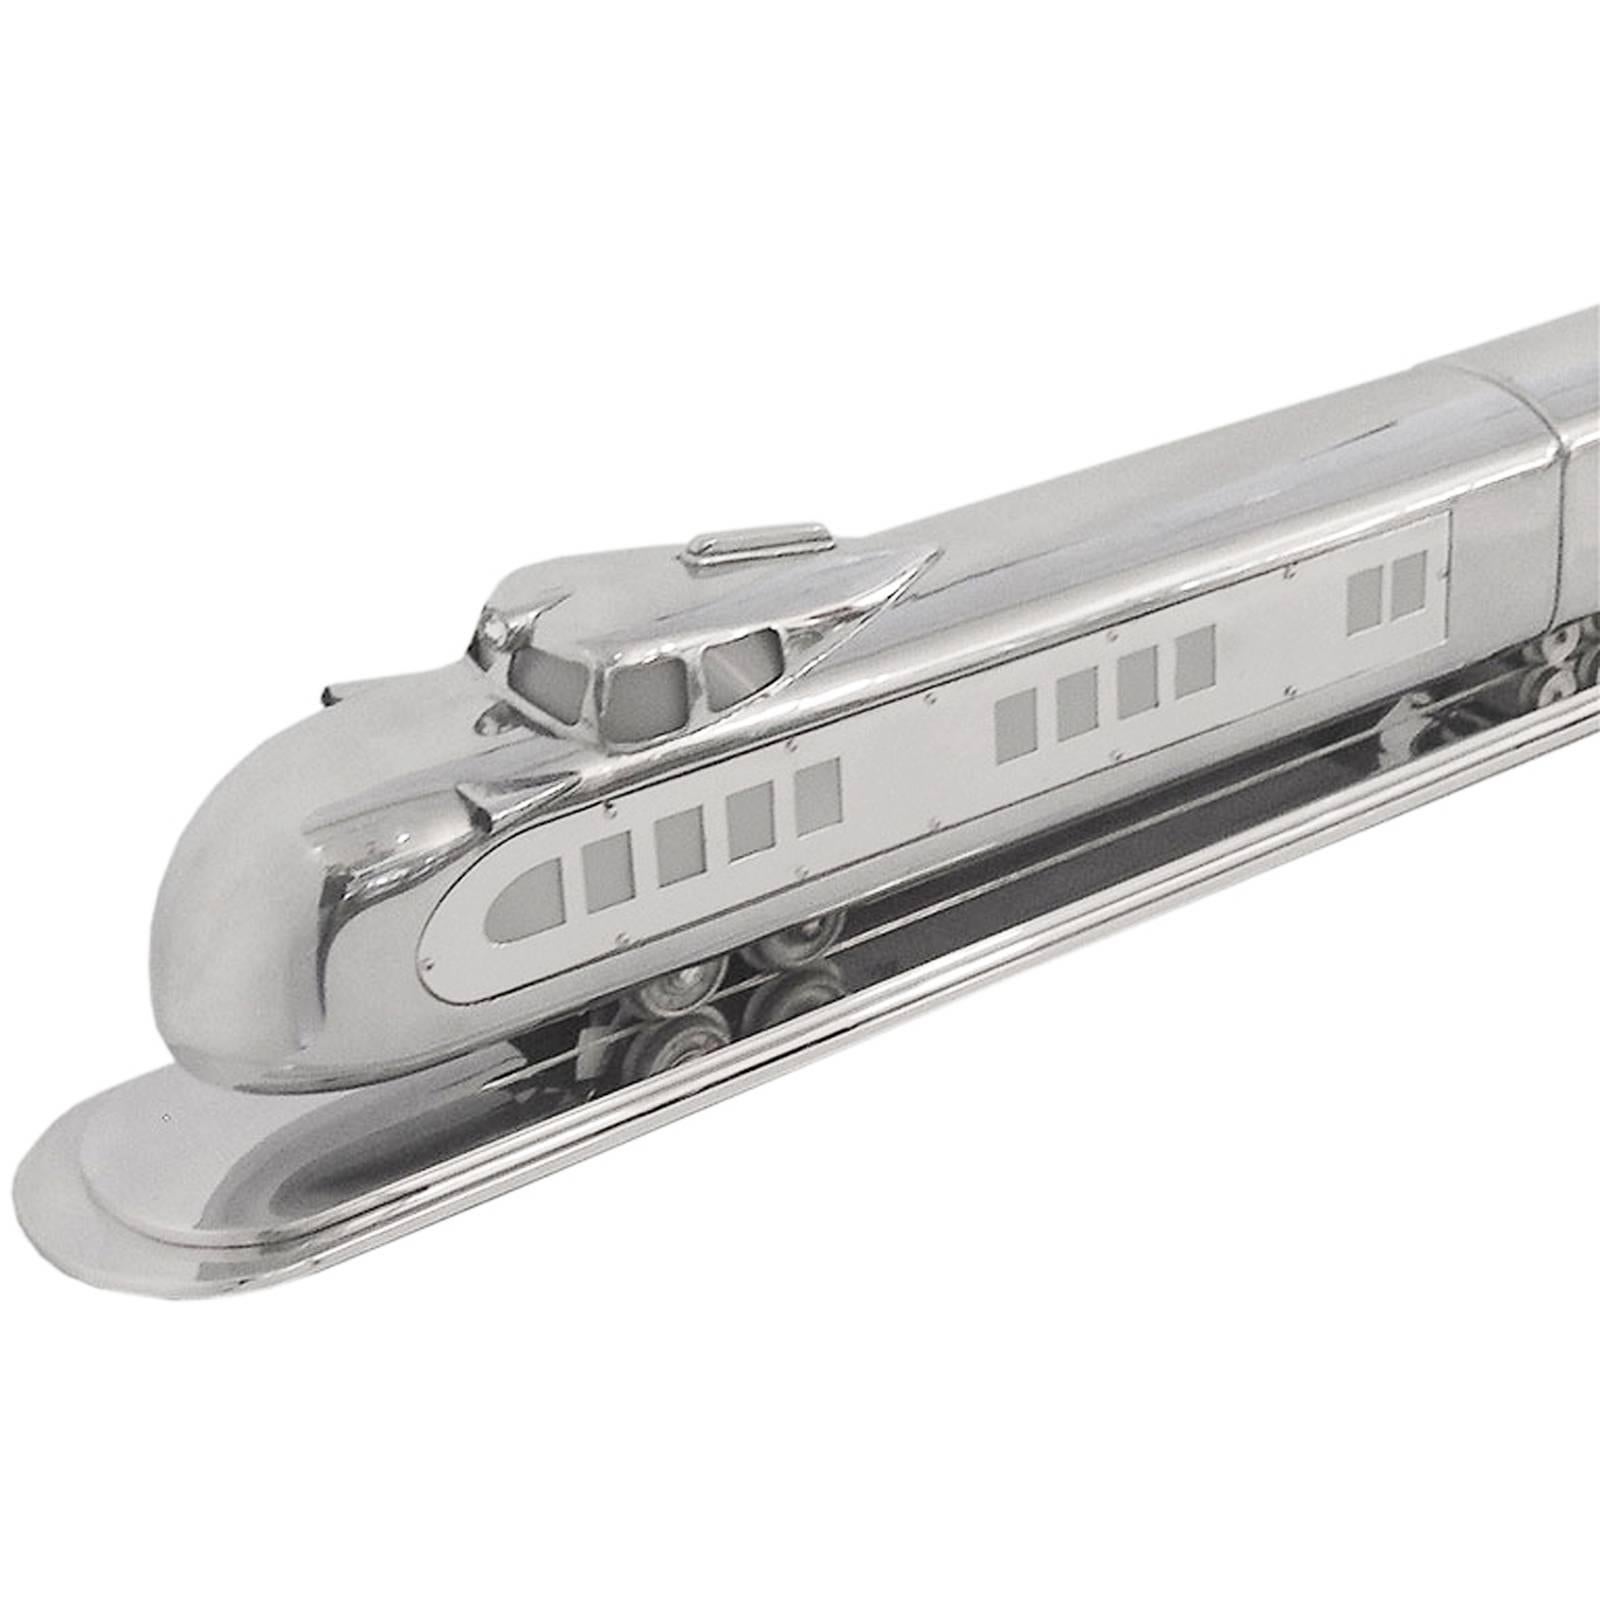 This large-scale train 5 1/2' long was made by General Train Company in 1933 for a short period of time. It has a machined aluminum presentation base and is wired to be displayed lite up or off. This train really defines the streamline vision of the